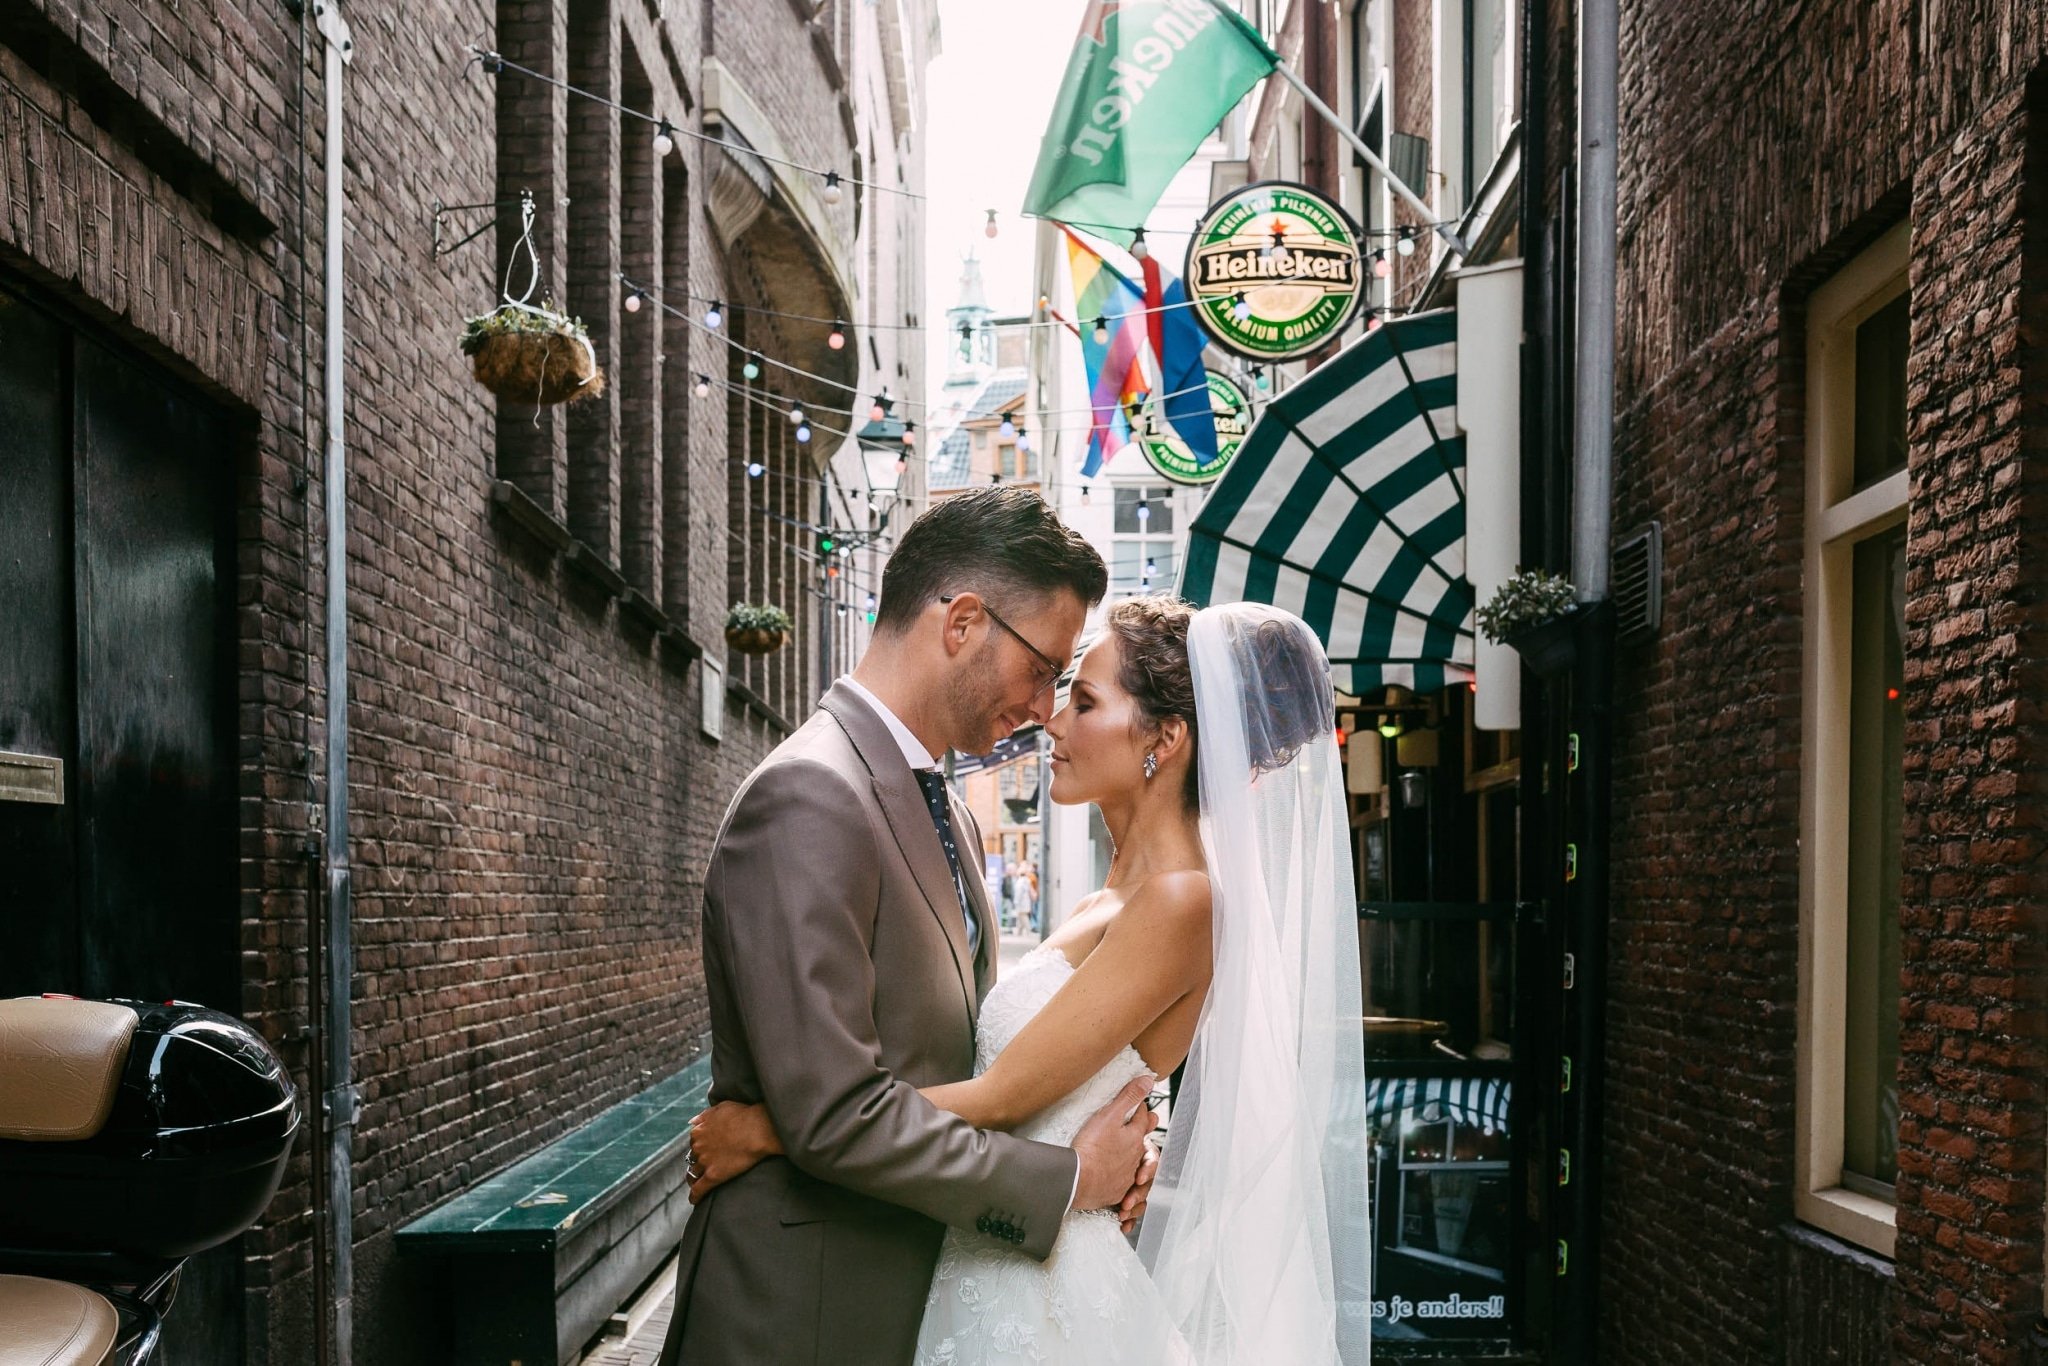 A bride and groom embrace in a narrow alley.